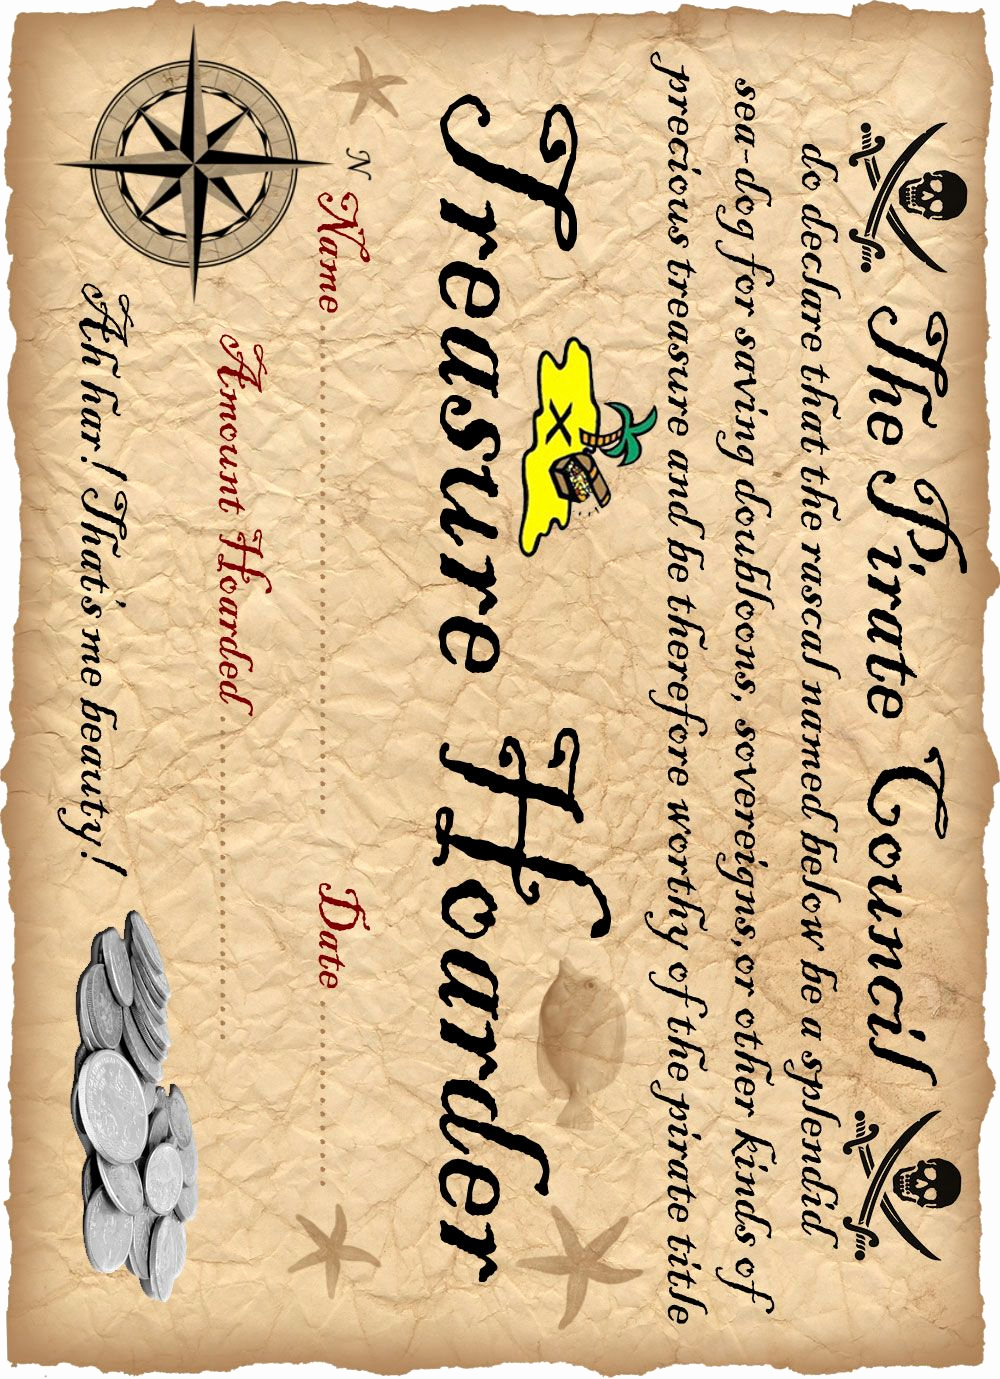 Life Saving Award Certificate Template Awesome Pin About Pirates and Pirate Birthday On Certificate Templates